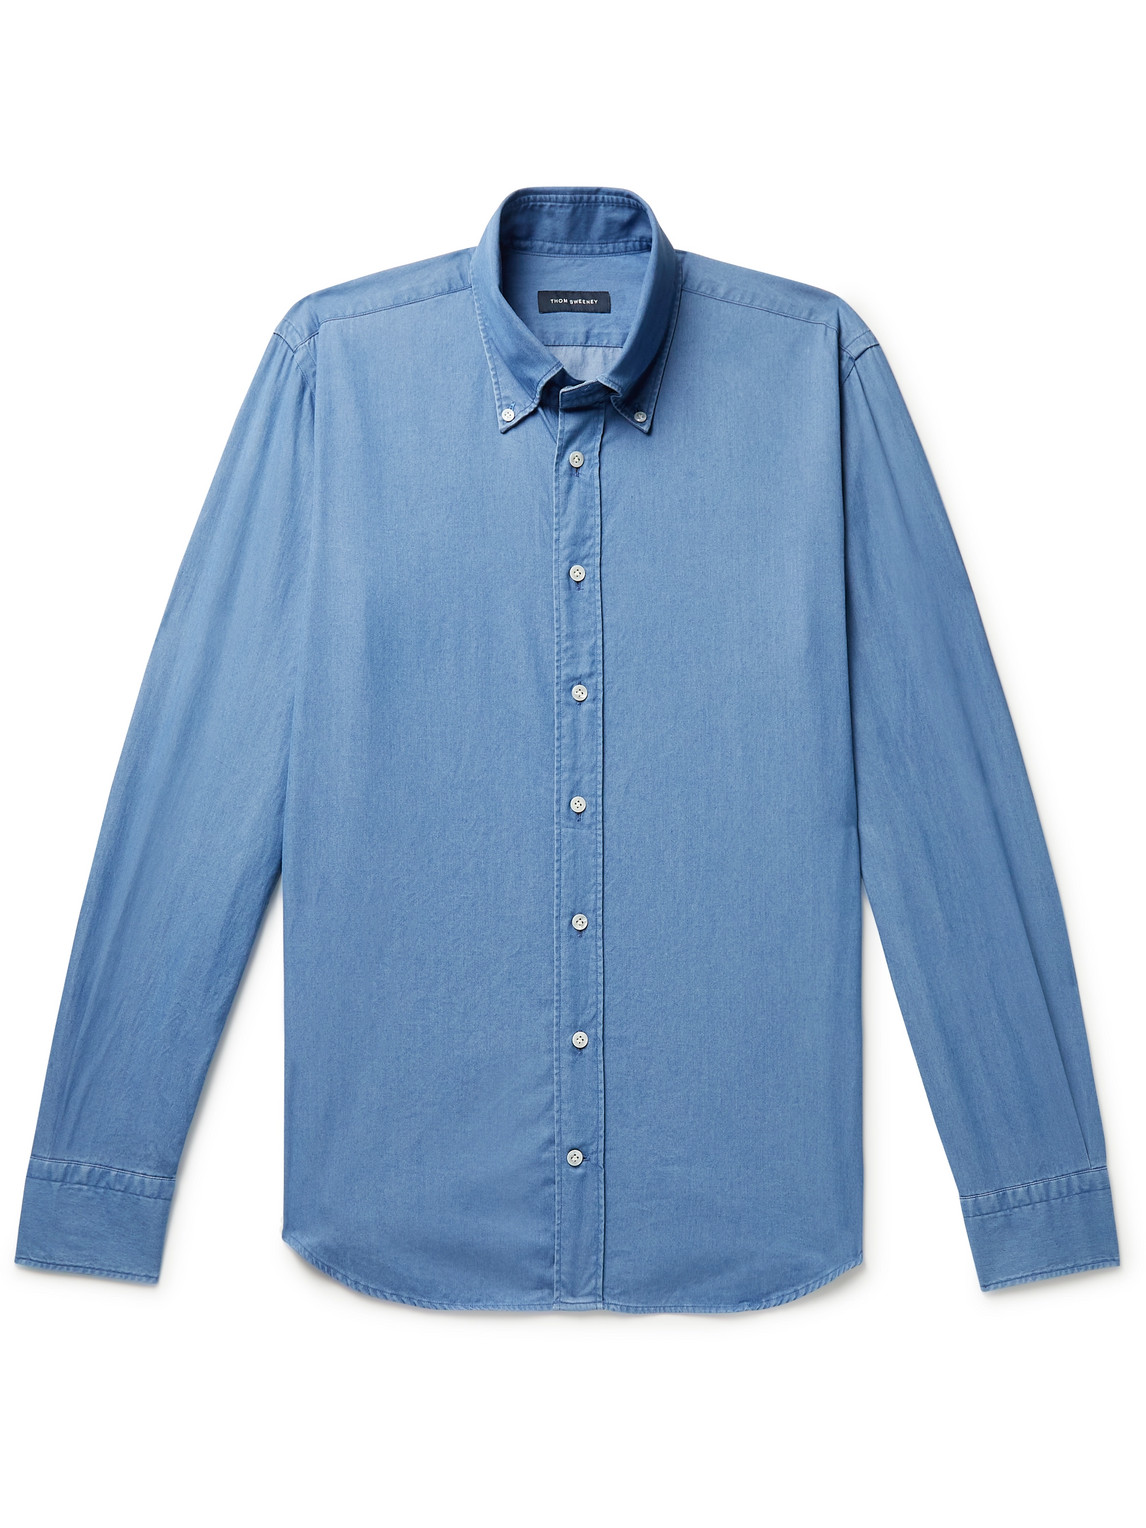 THOM SWEENEY BUTTON-DOWN COLLAR COTTON-CHAMBRAY SHIRT